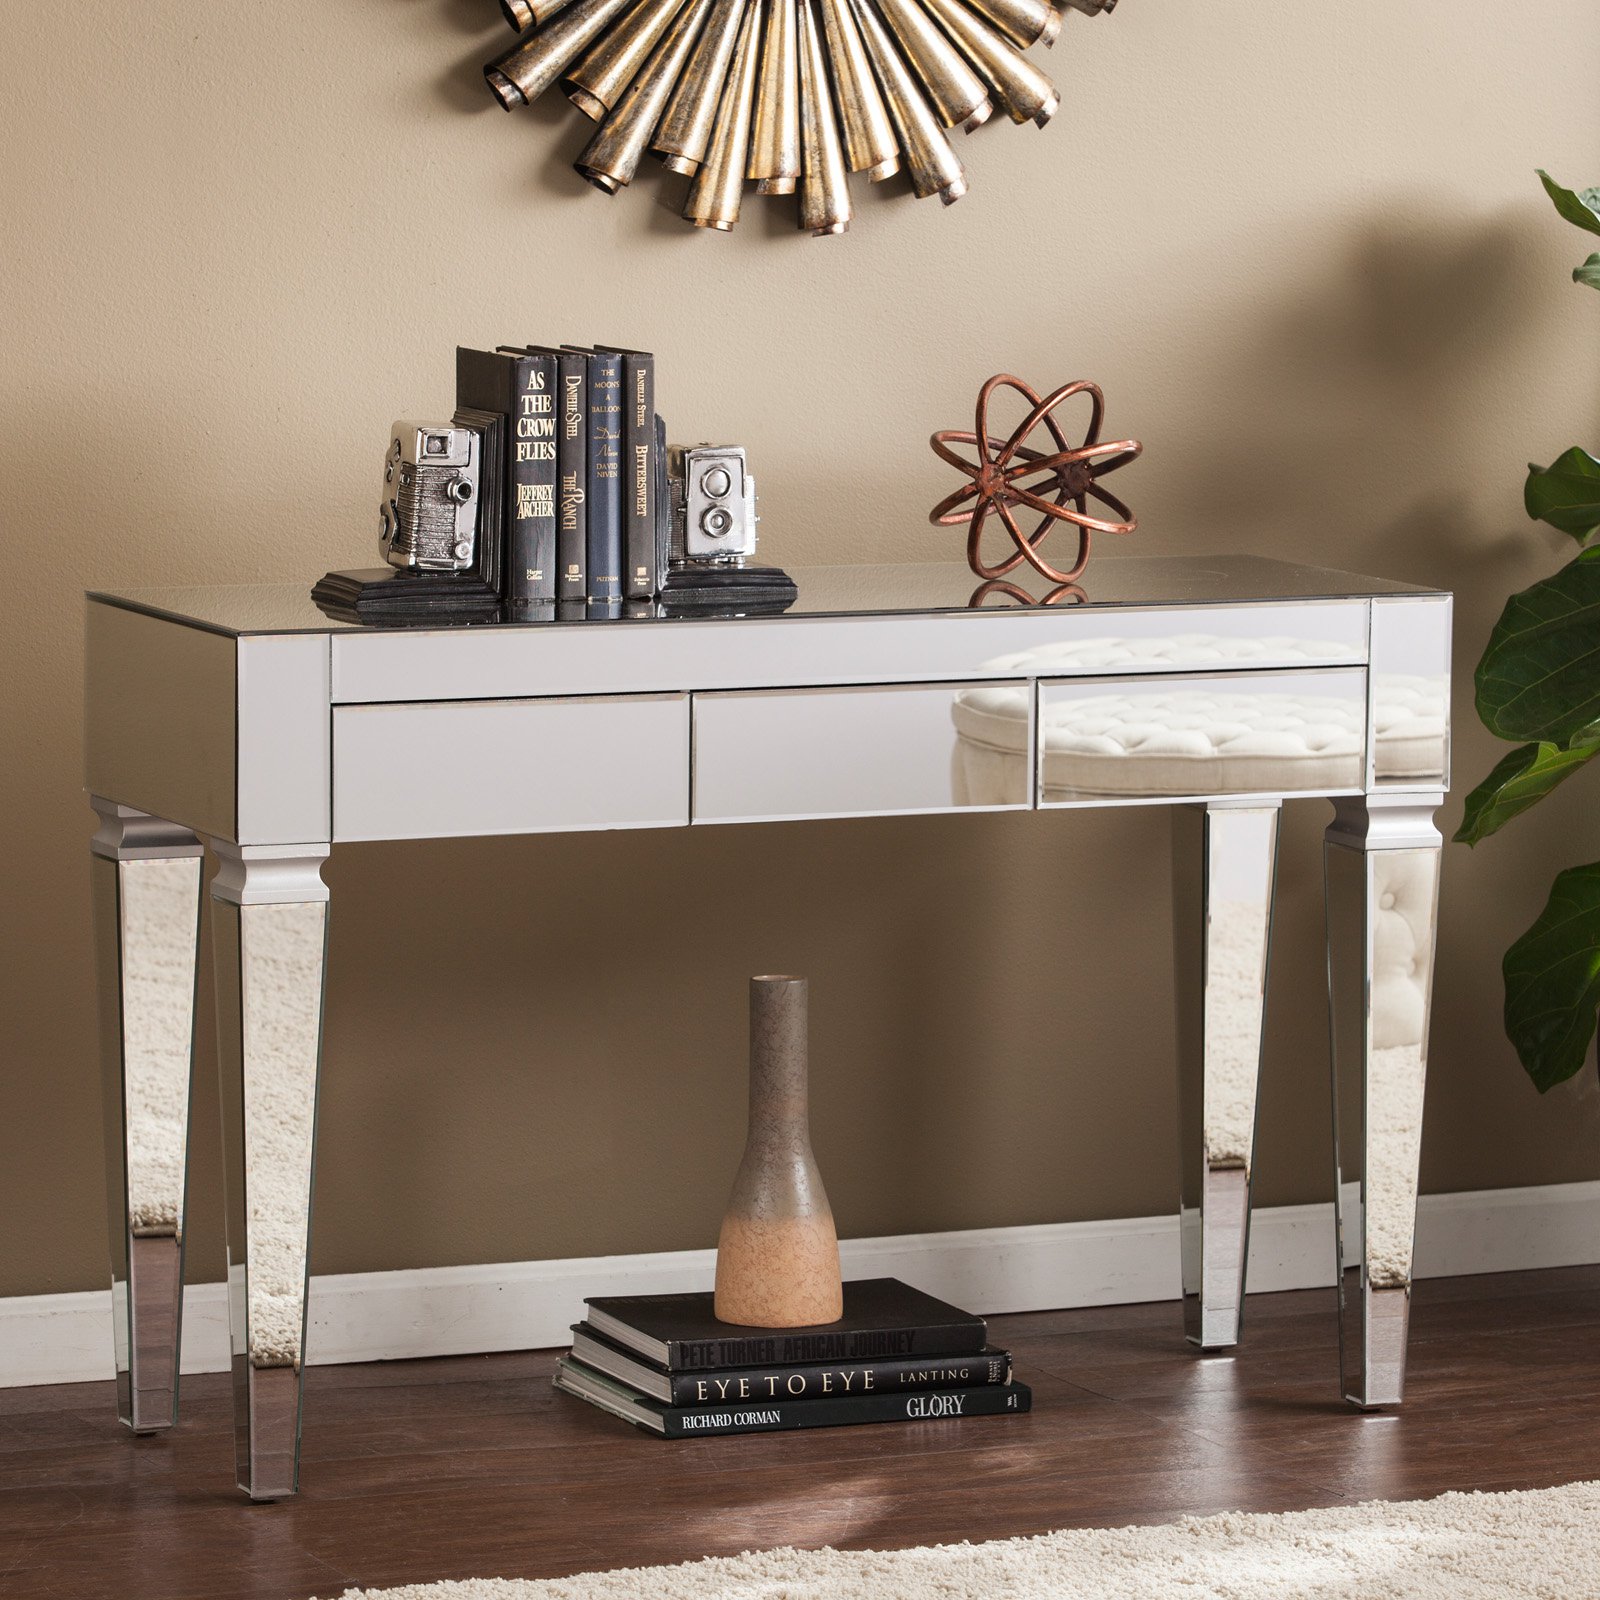 46" Clear and Silver Contemporary Beveled Mirror Rectangular Top Console Table - image 1 of 10